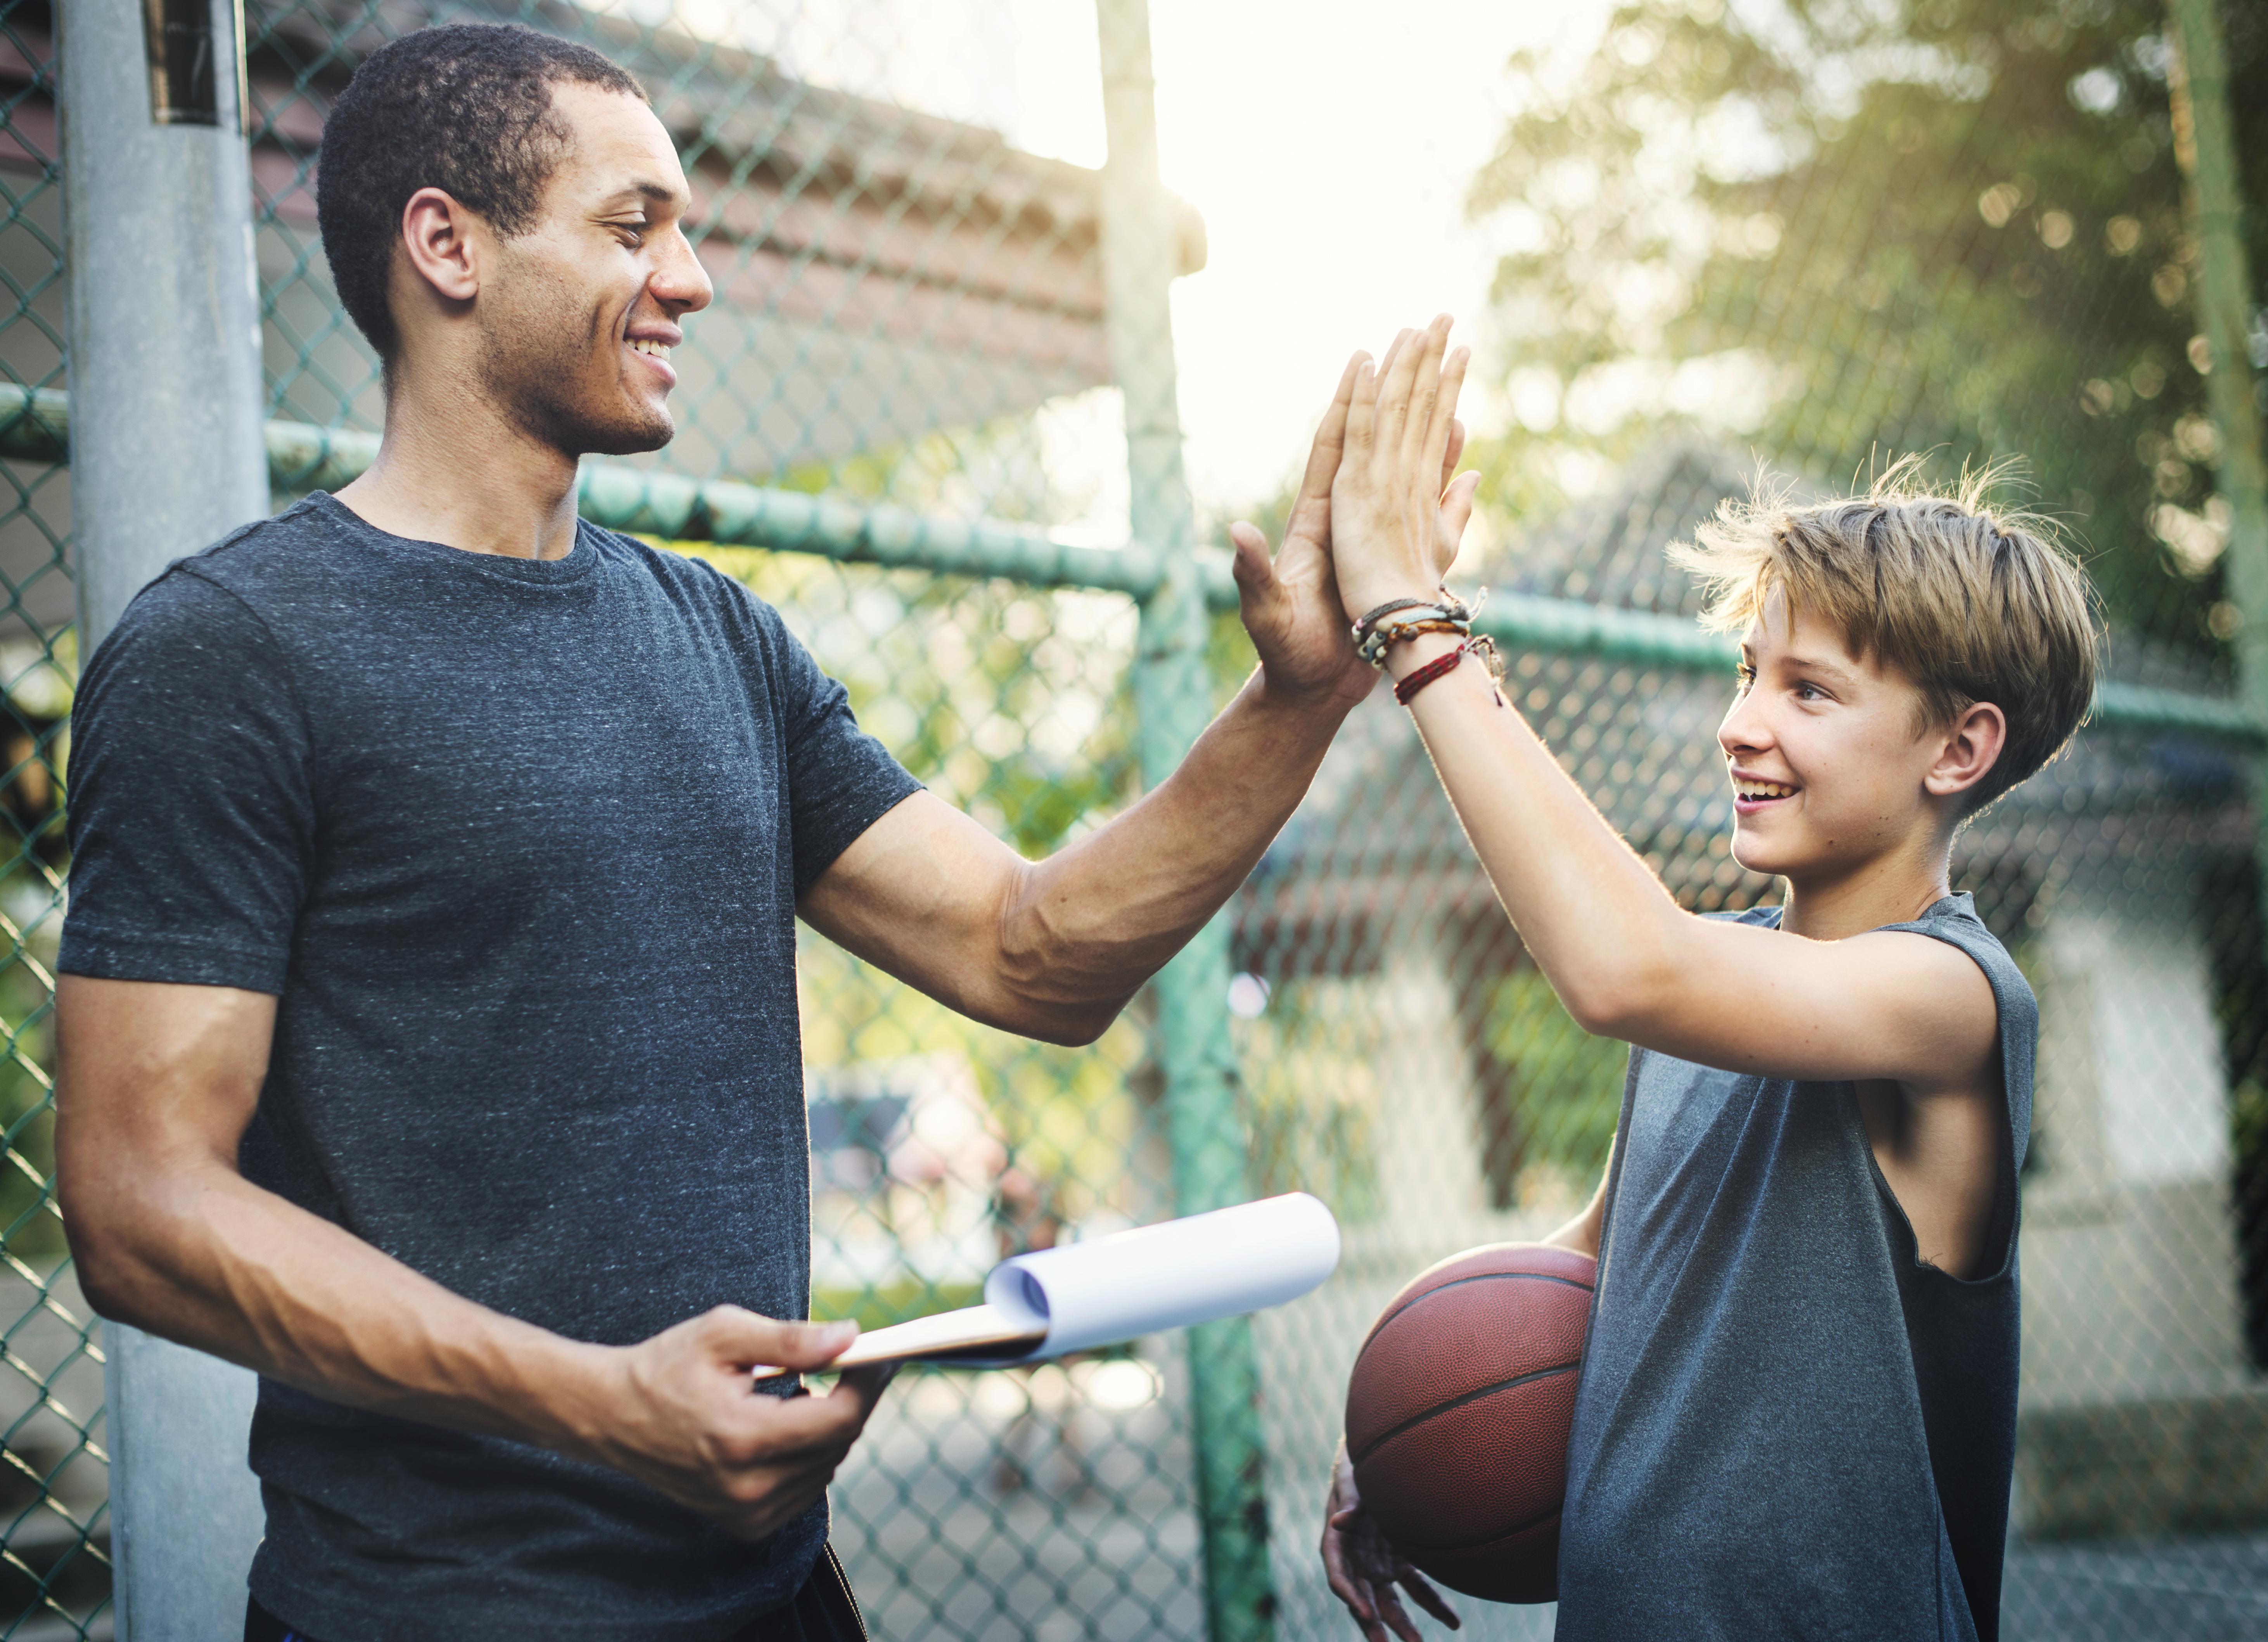 A young boy carrying a basketball is high-fiving an adult male carrying a clipboard on an outdoor basketball court.